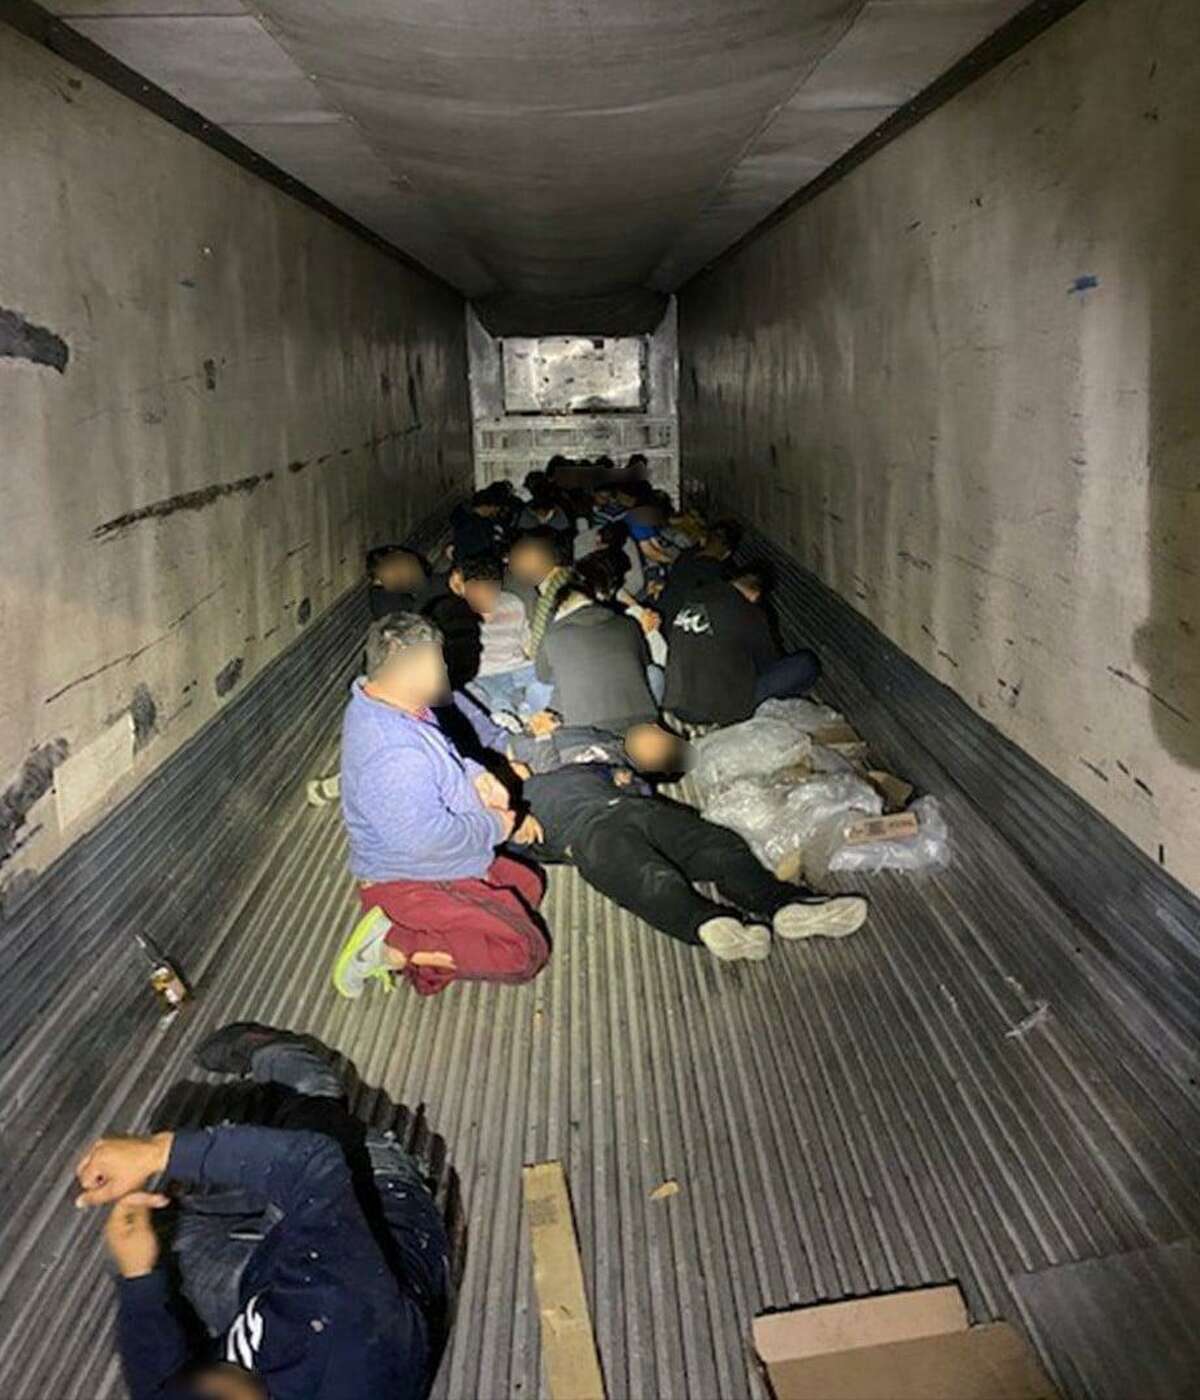 U.S. Border Patrol agents said they found 40 people inside a trailer. All were immigrants who were illegally present in the country. The truck driver was arrested on human smuggling charges.